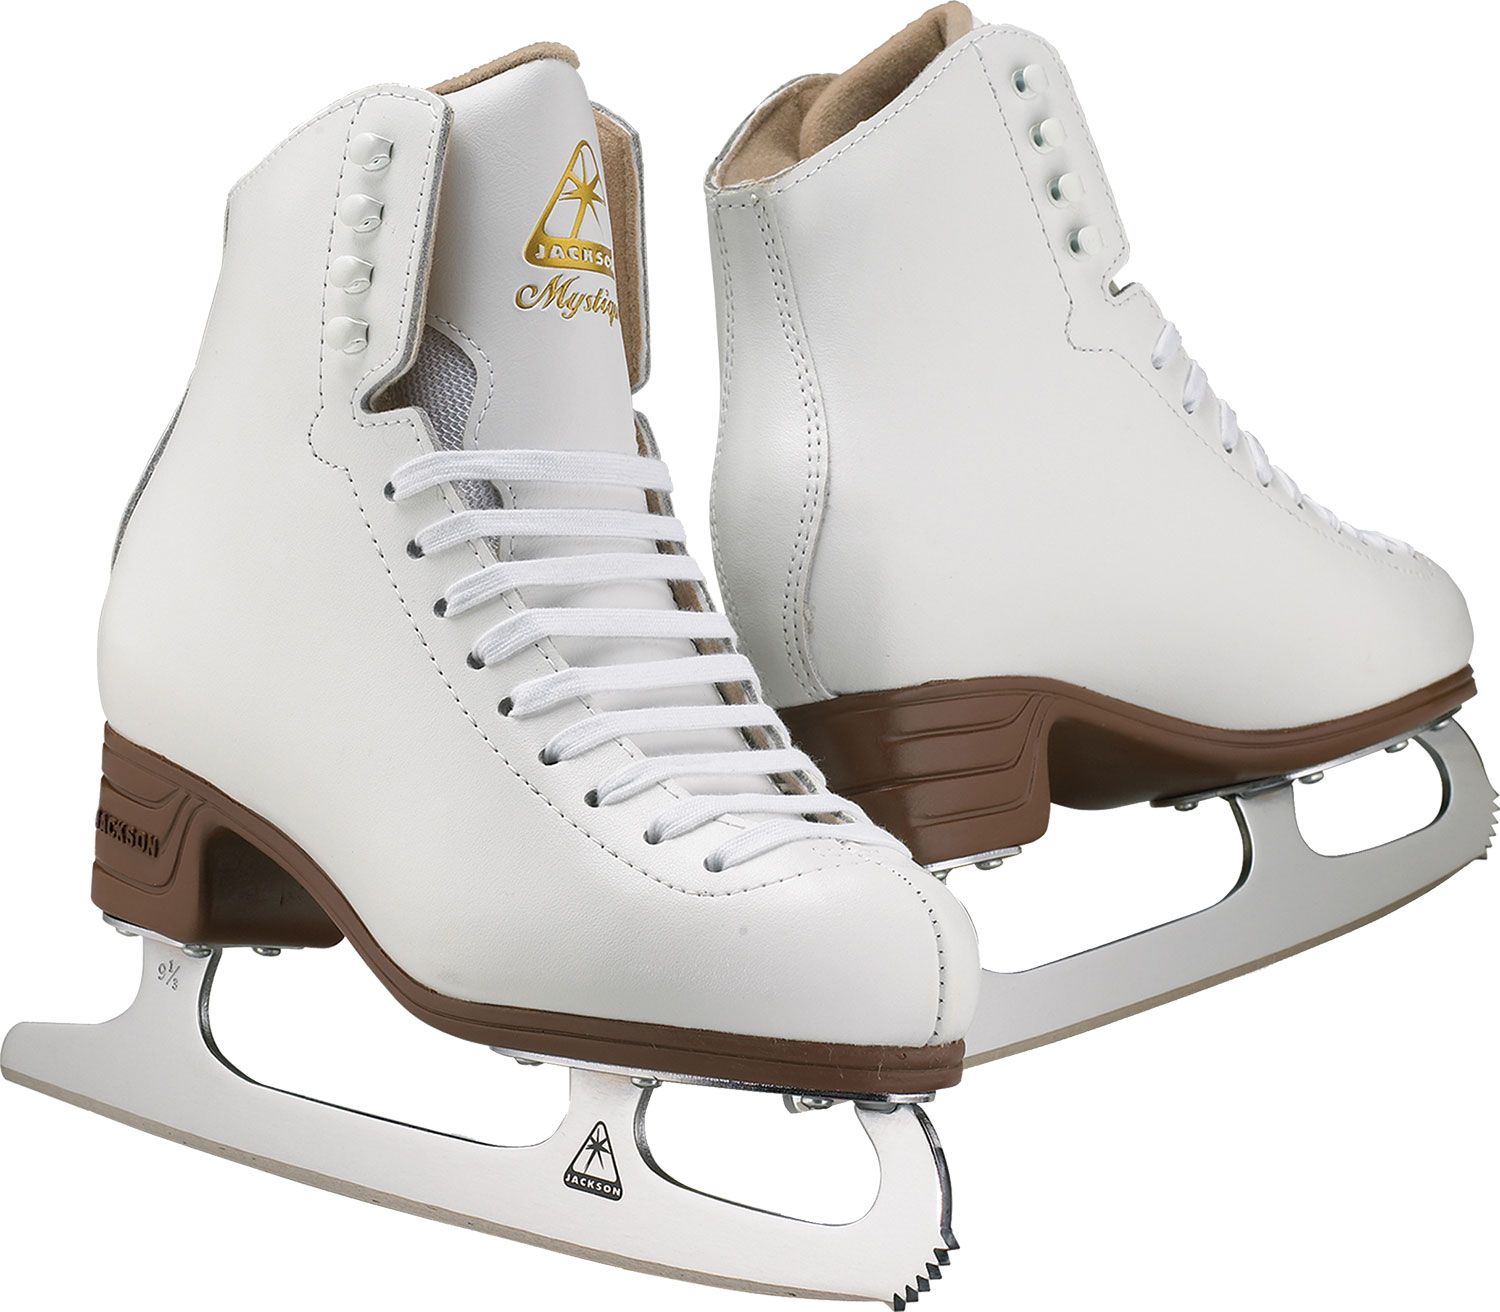 ice skating shoes for beginners